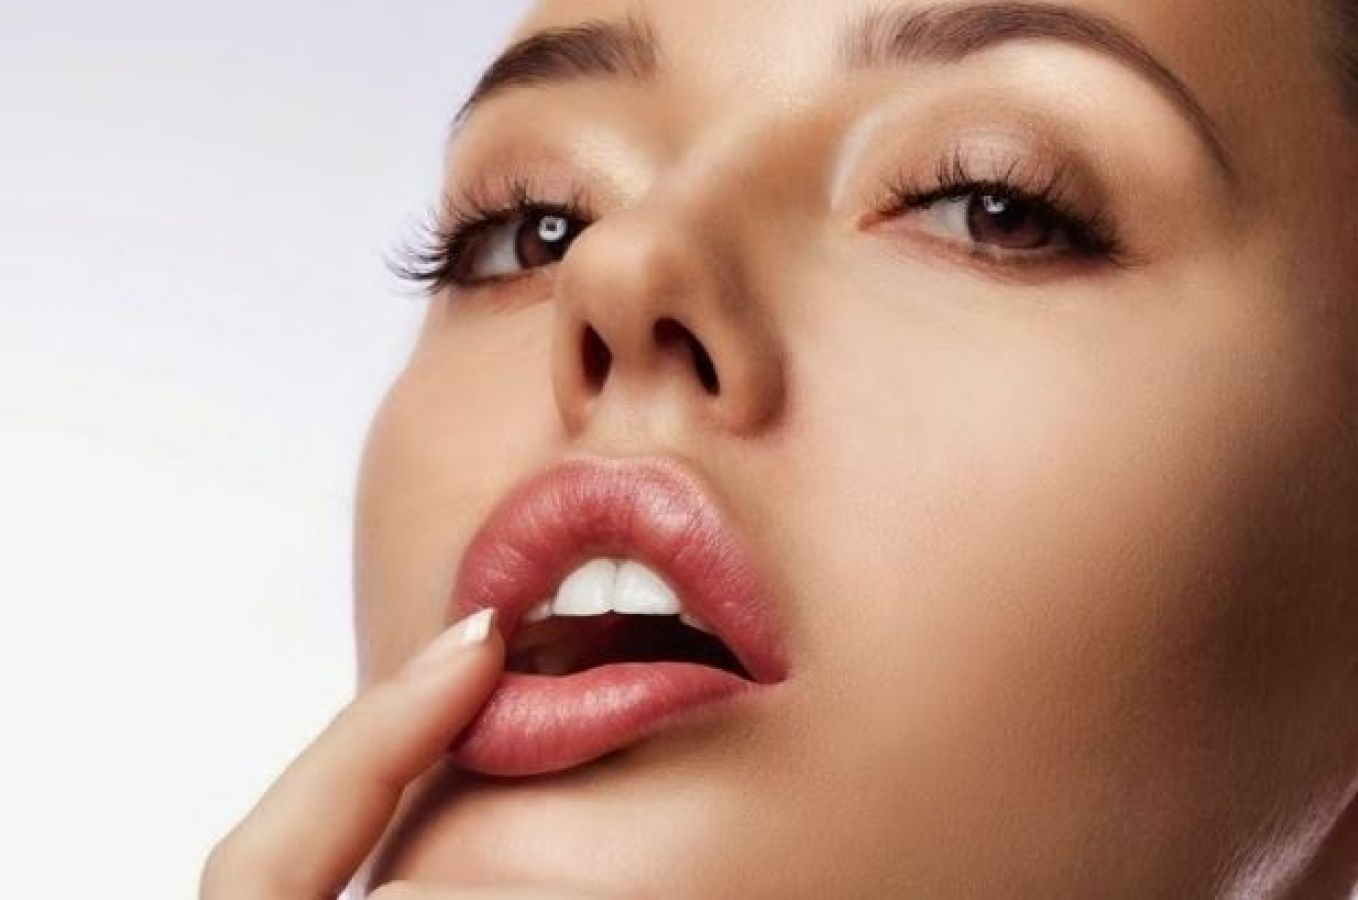 The Ultimate Guide to Post-Surgery Care after Lip Lift: Tips for a Speedy Recovery